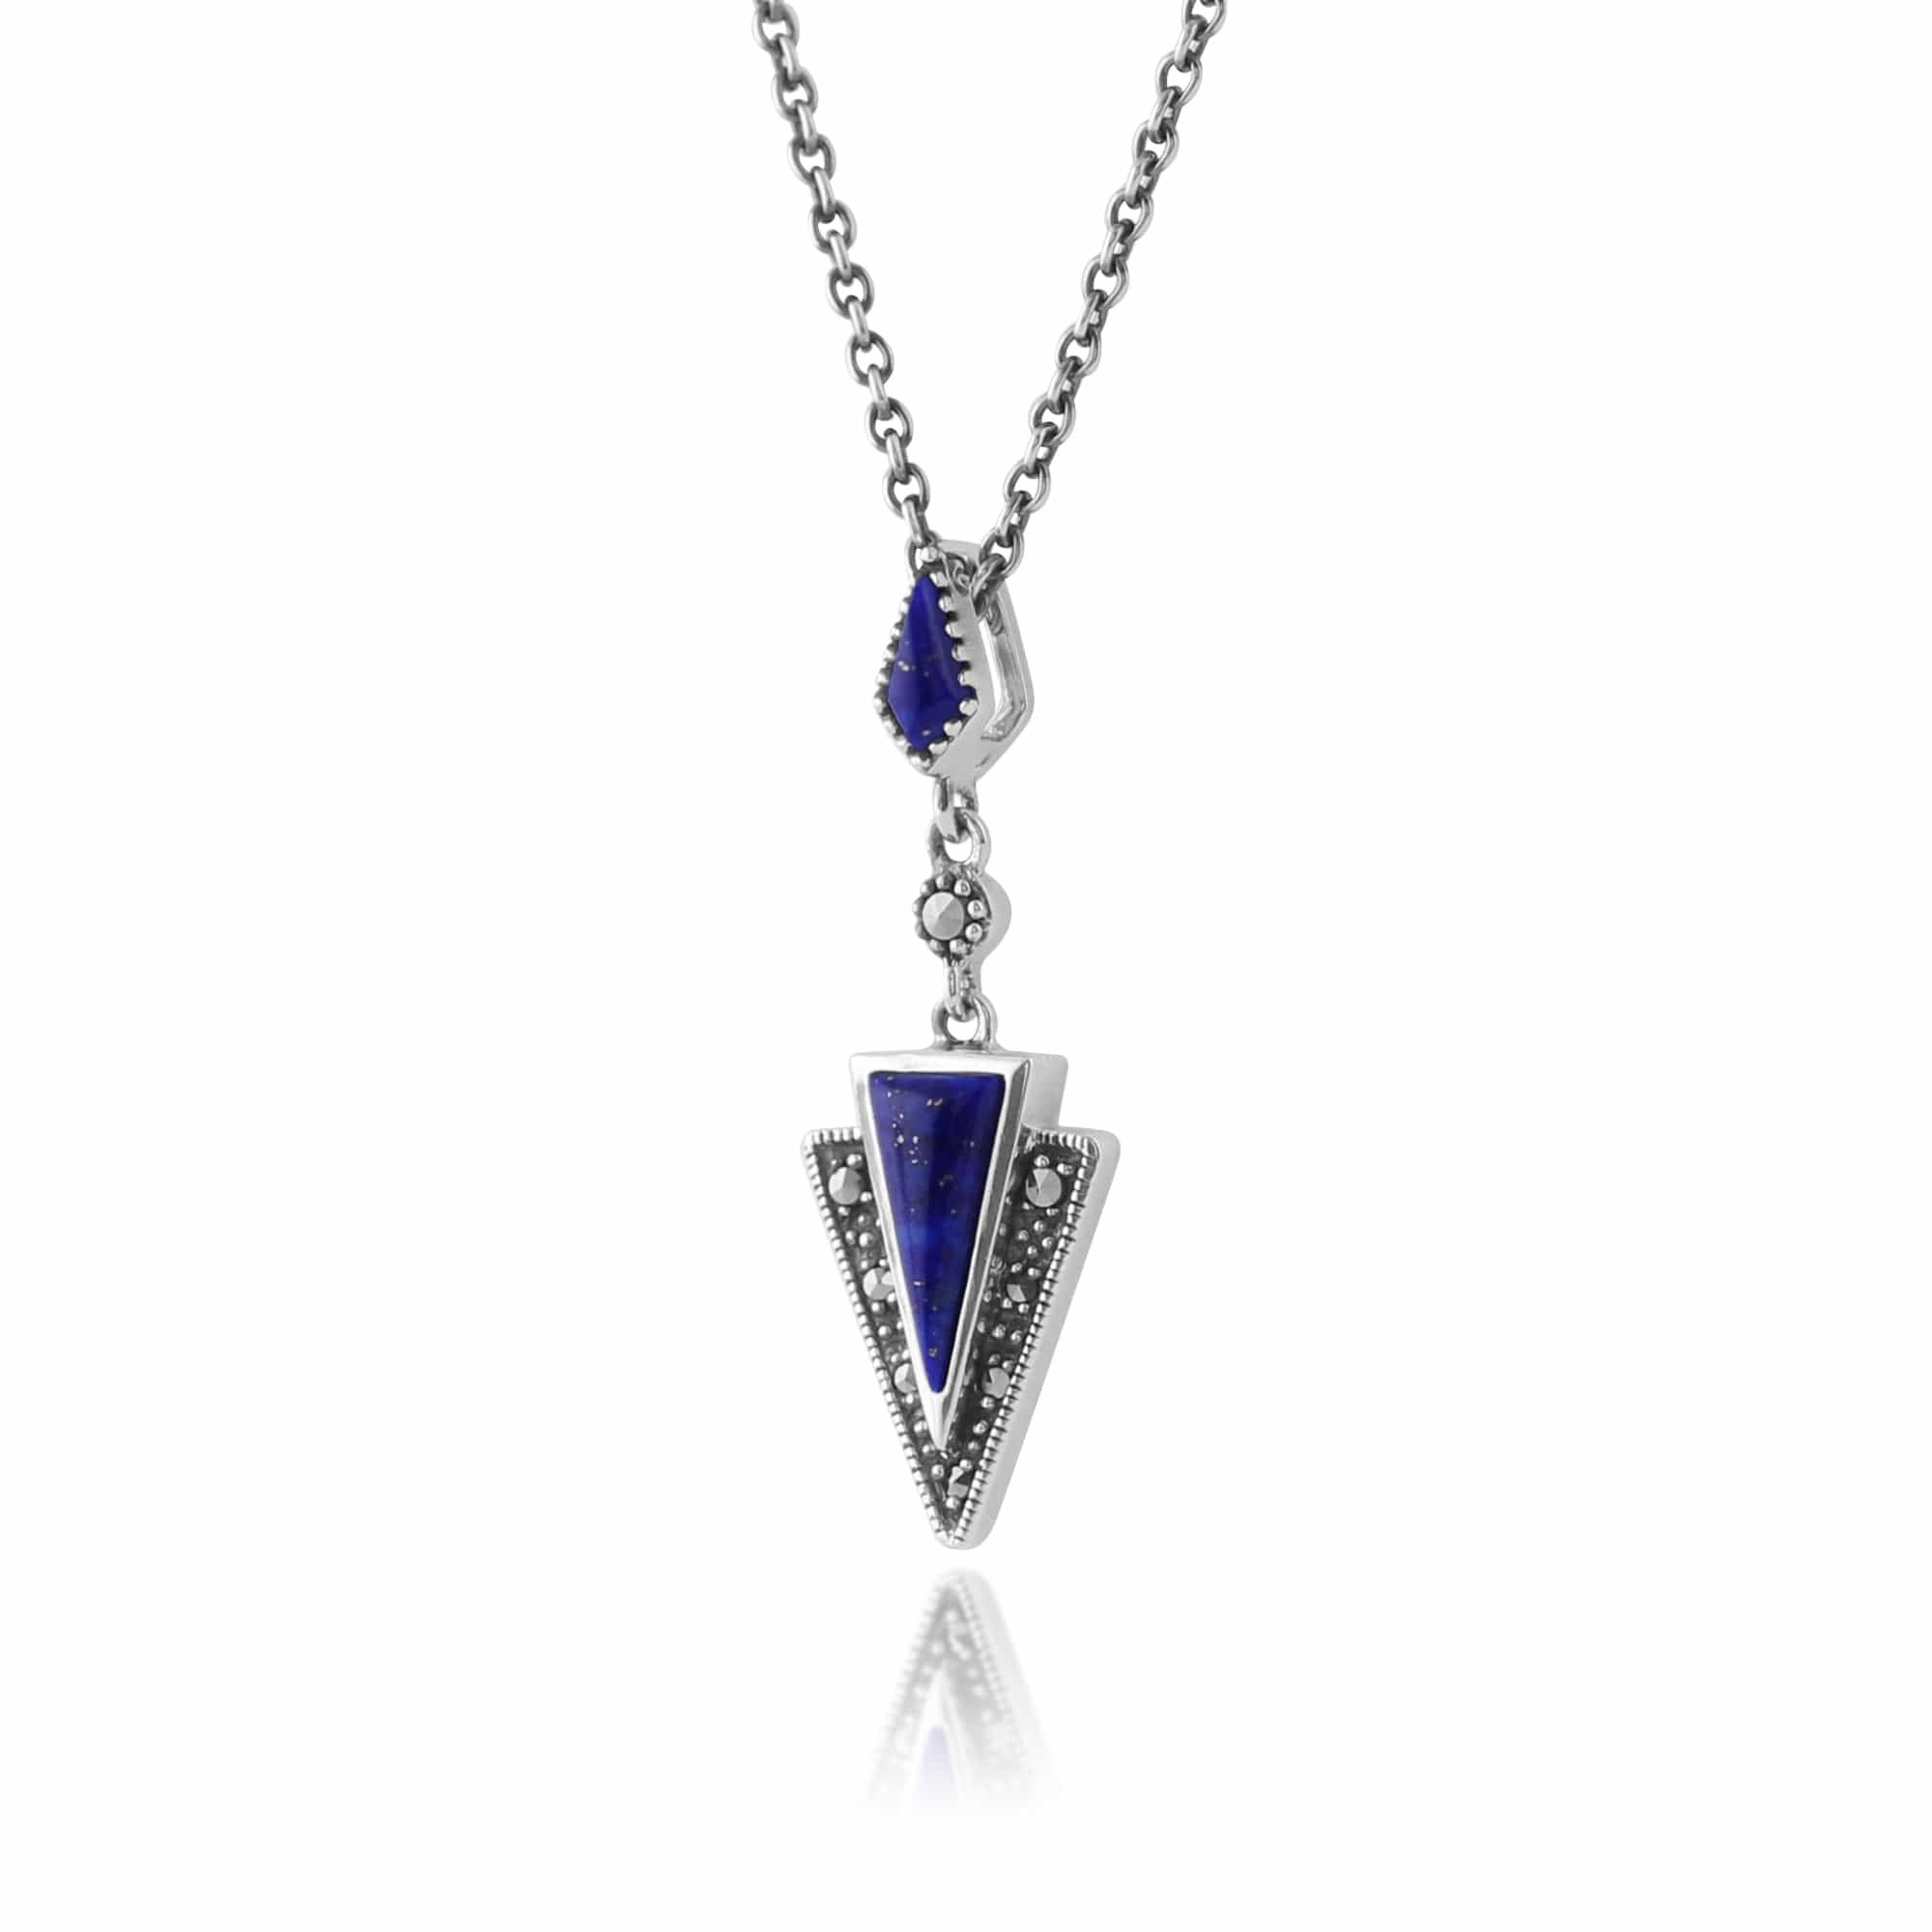 214E823002925-214N658303925 Art Deco Style Style Triangle Lapis Lazuli & Marcasite Drop Earrings & Necklace Set in 925 Sterling Silver 5